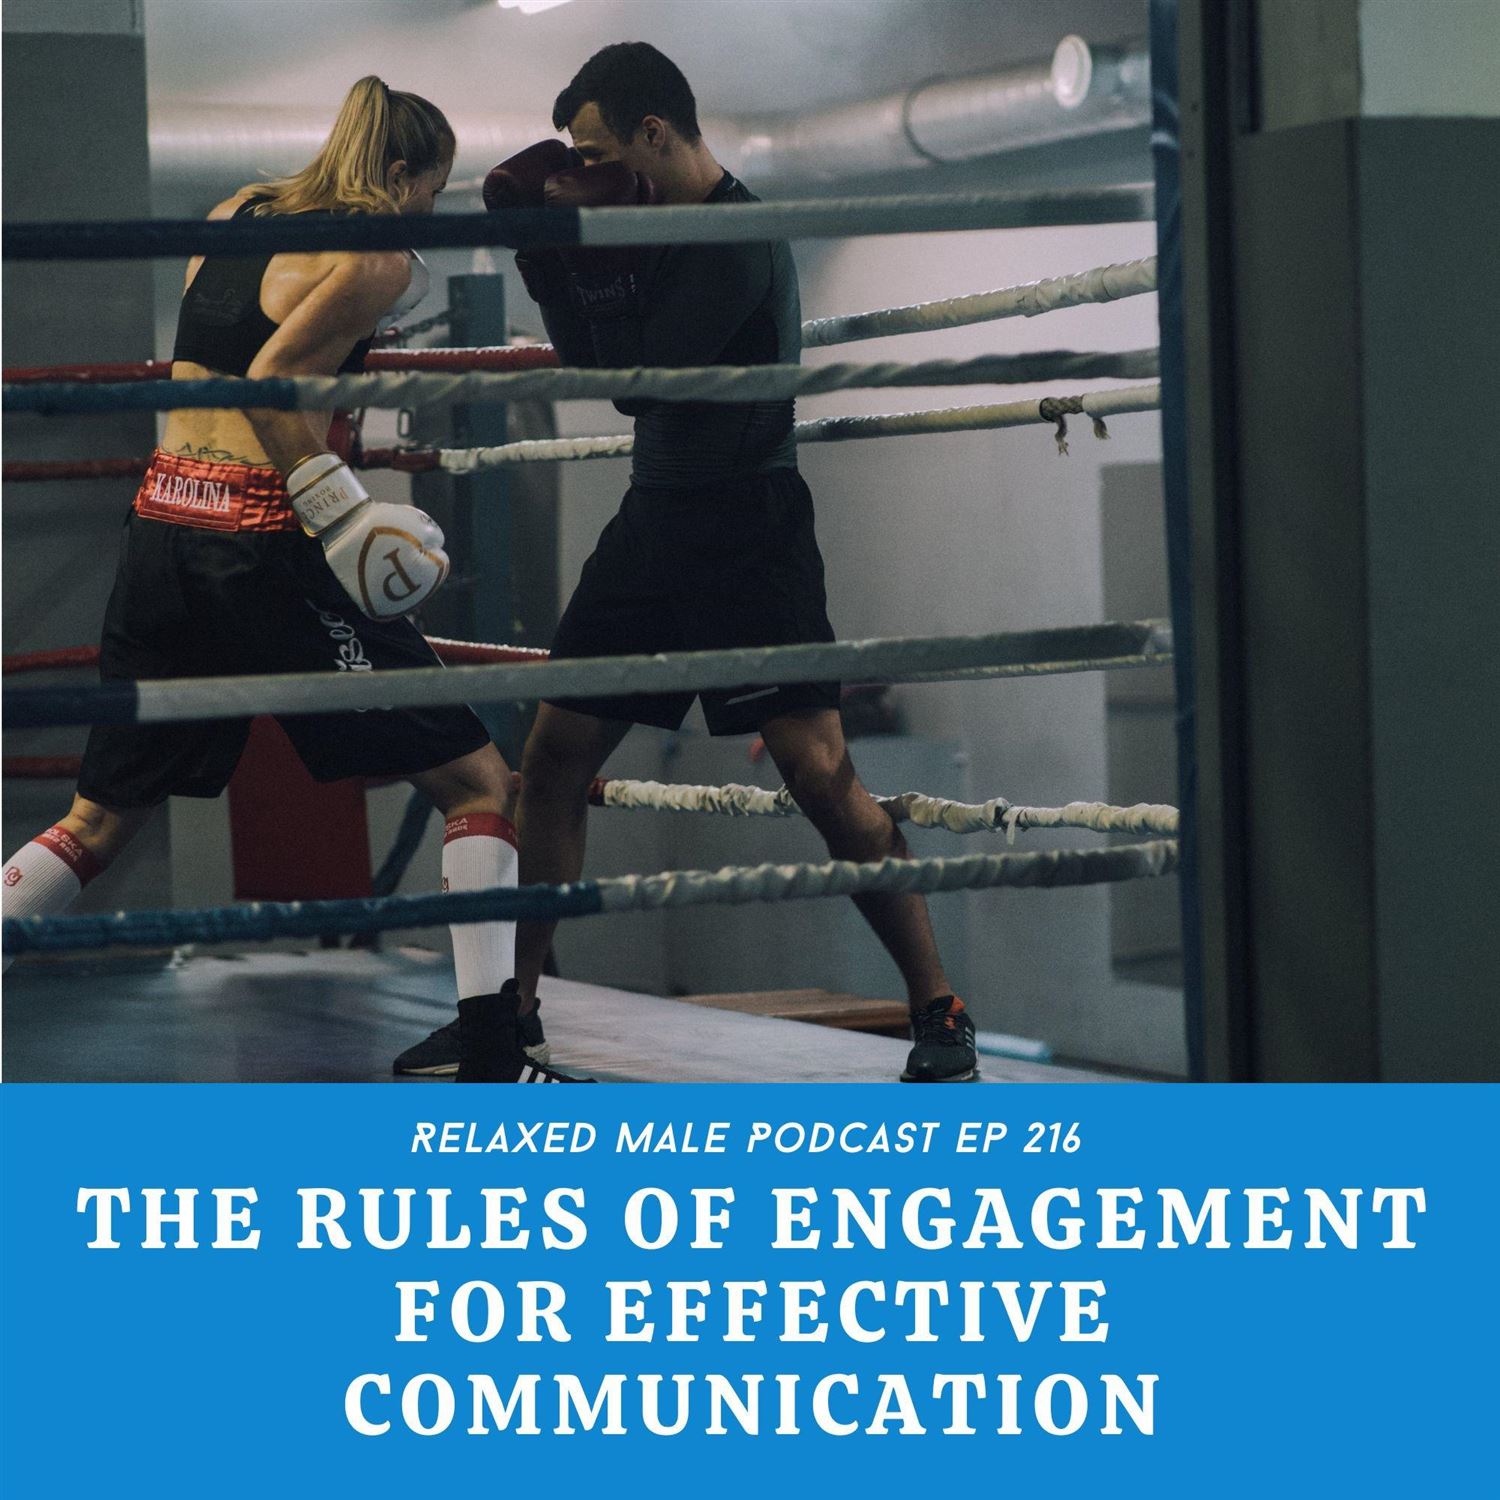 The Rules of Engagement for Effective Communication